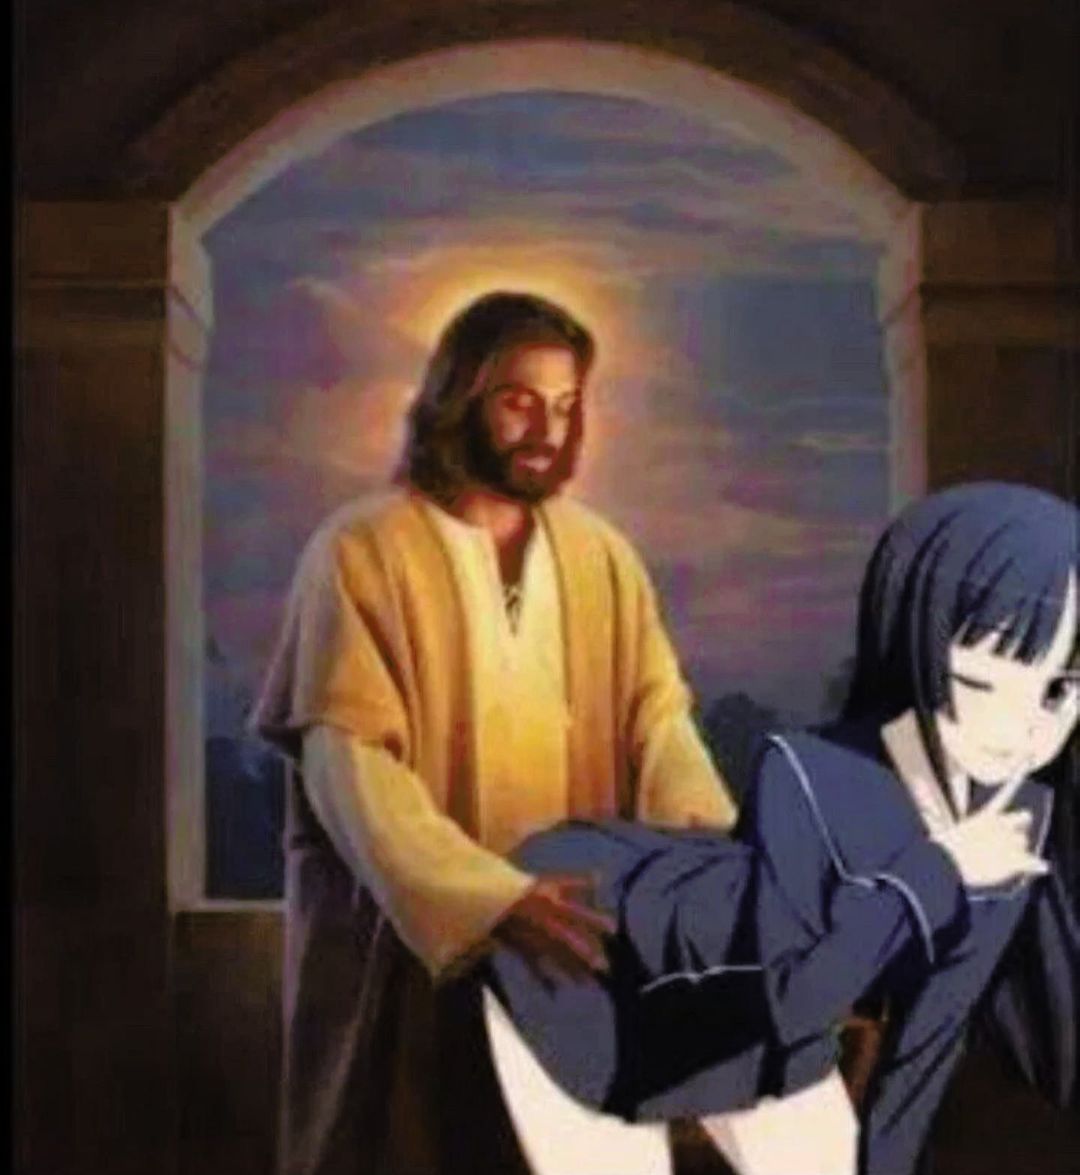 even-the-lord-jesus-christ-loves-him-some-anime-f3q5l1zrvt-1080x1175.jpg